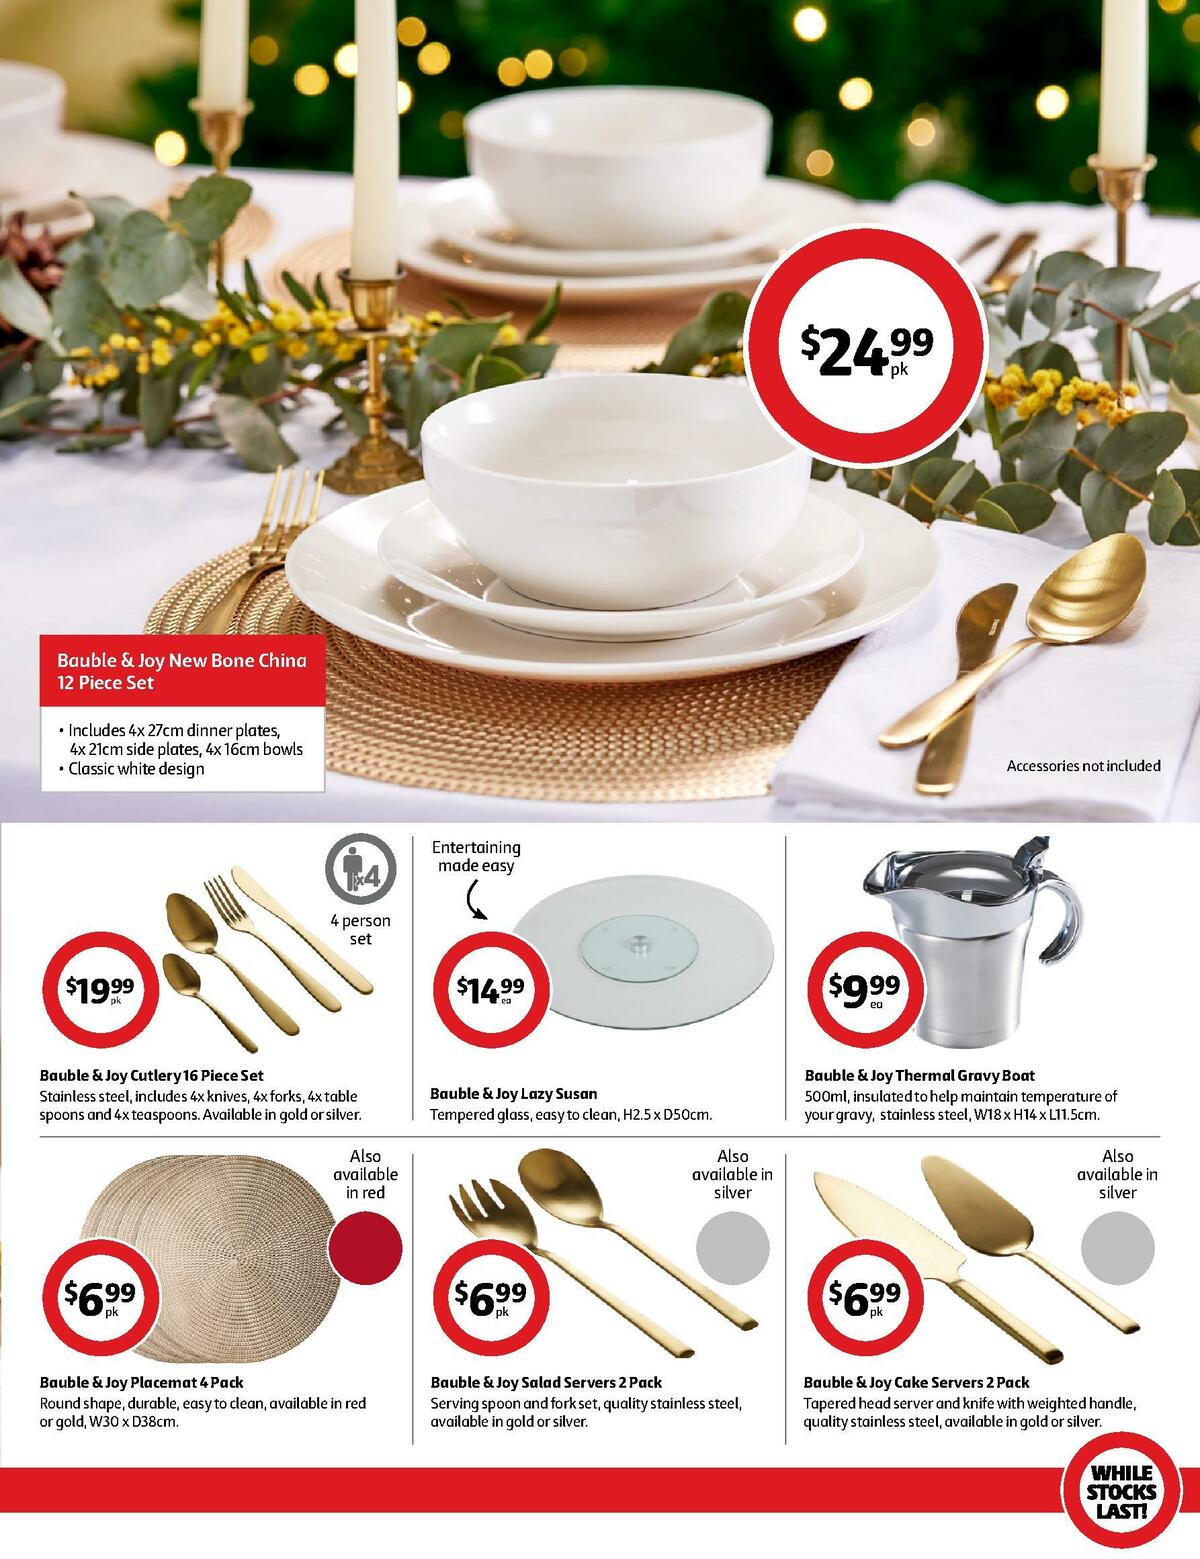 Coles Best Buys - Christmas Entertaining Catalogues from 11 November